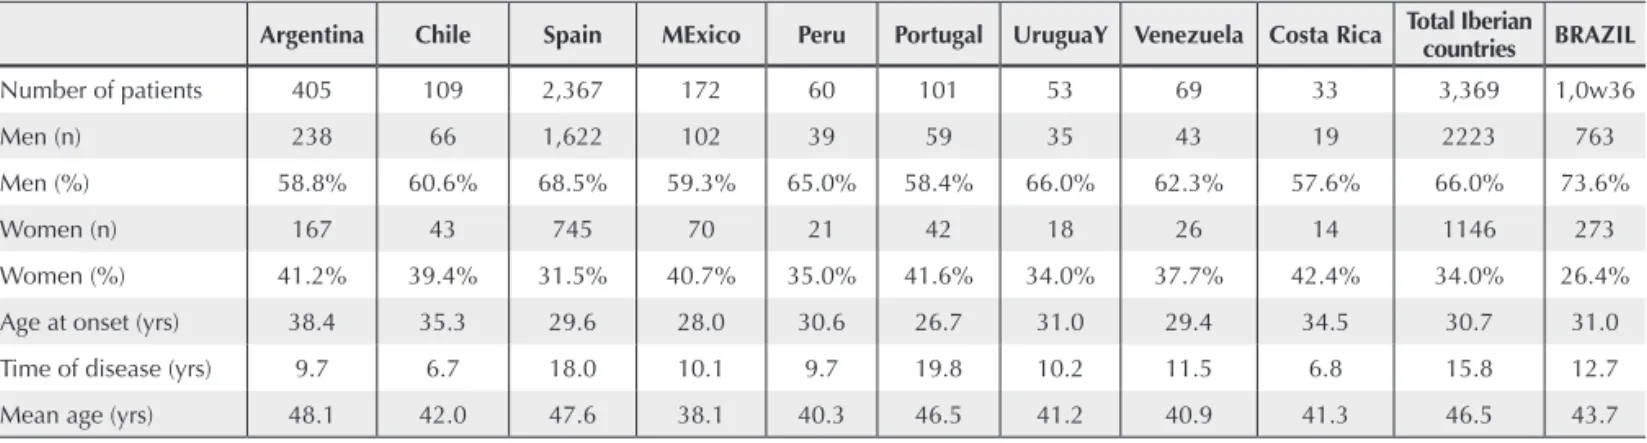 Table 1. Data obtained from patients with SpA from the RESPONDIA study, compared with the values obtained from  Brazilian patients regarding the number of patients, age at onset, time of the disease and age of the studied patients